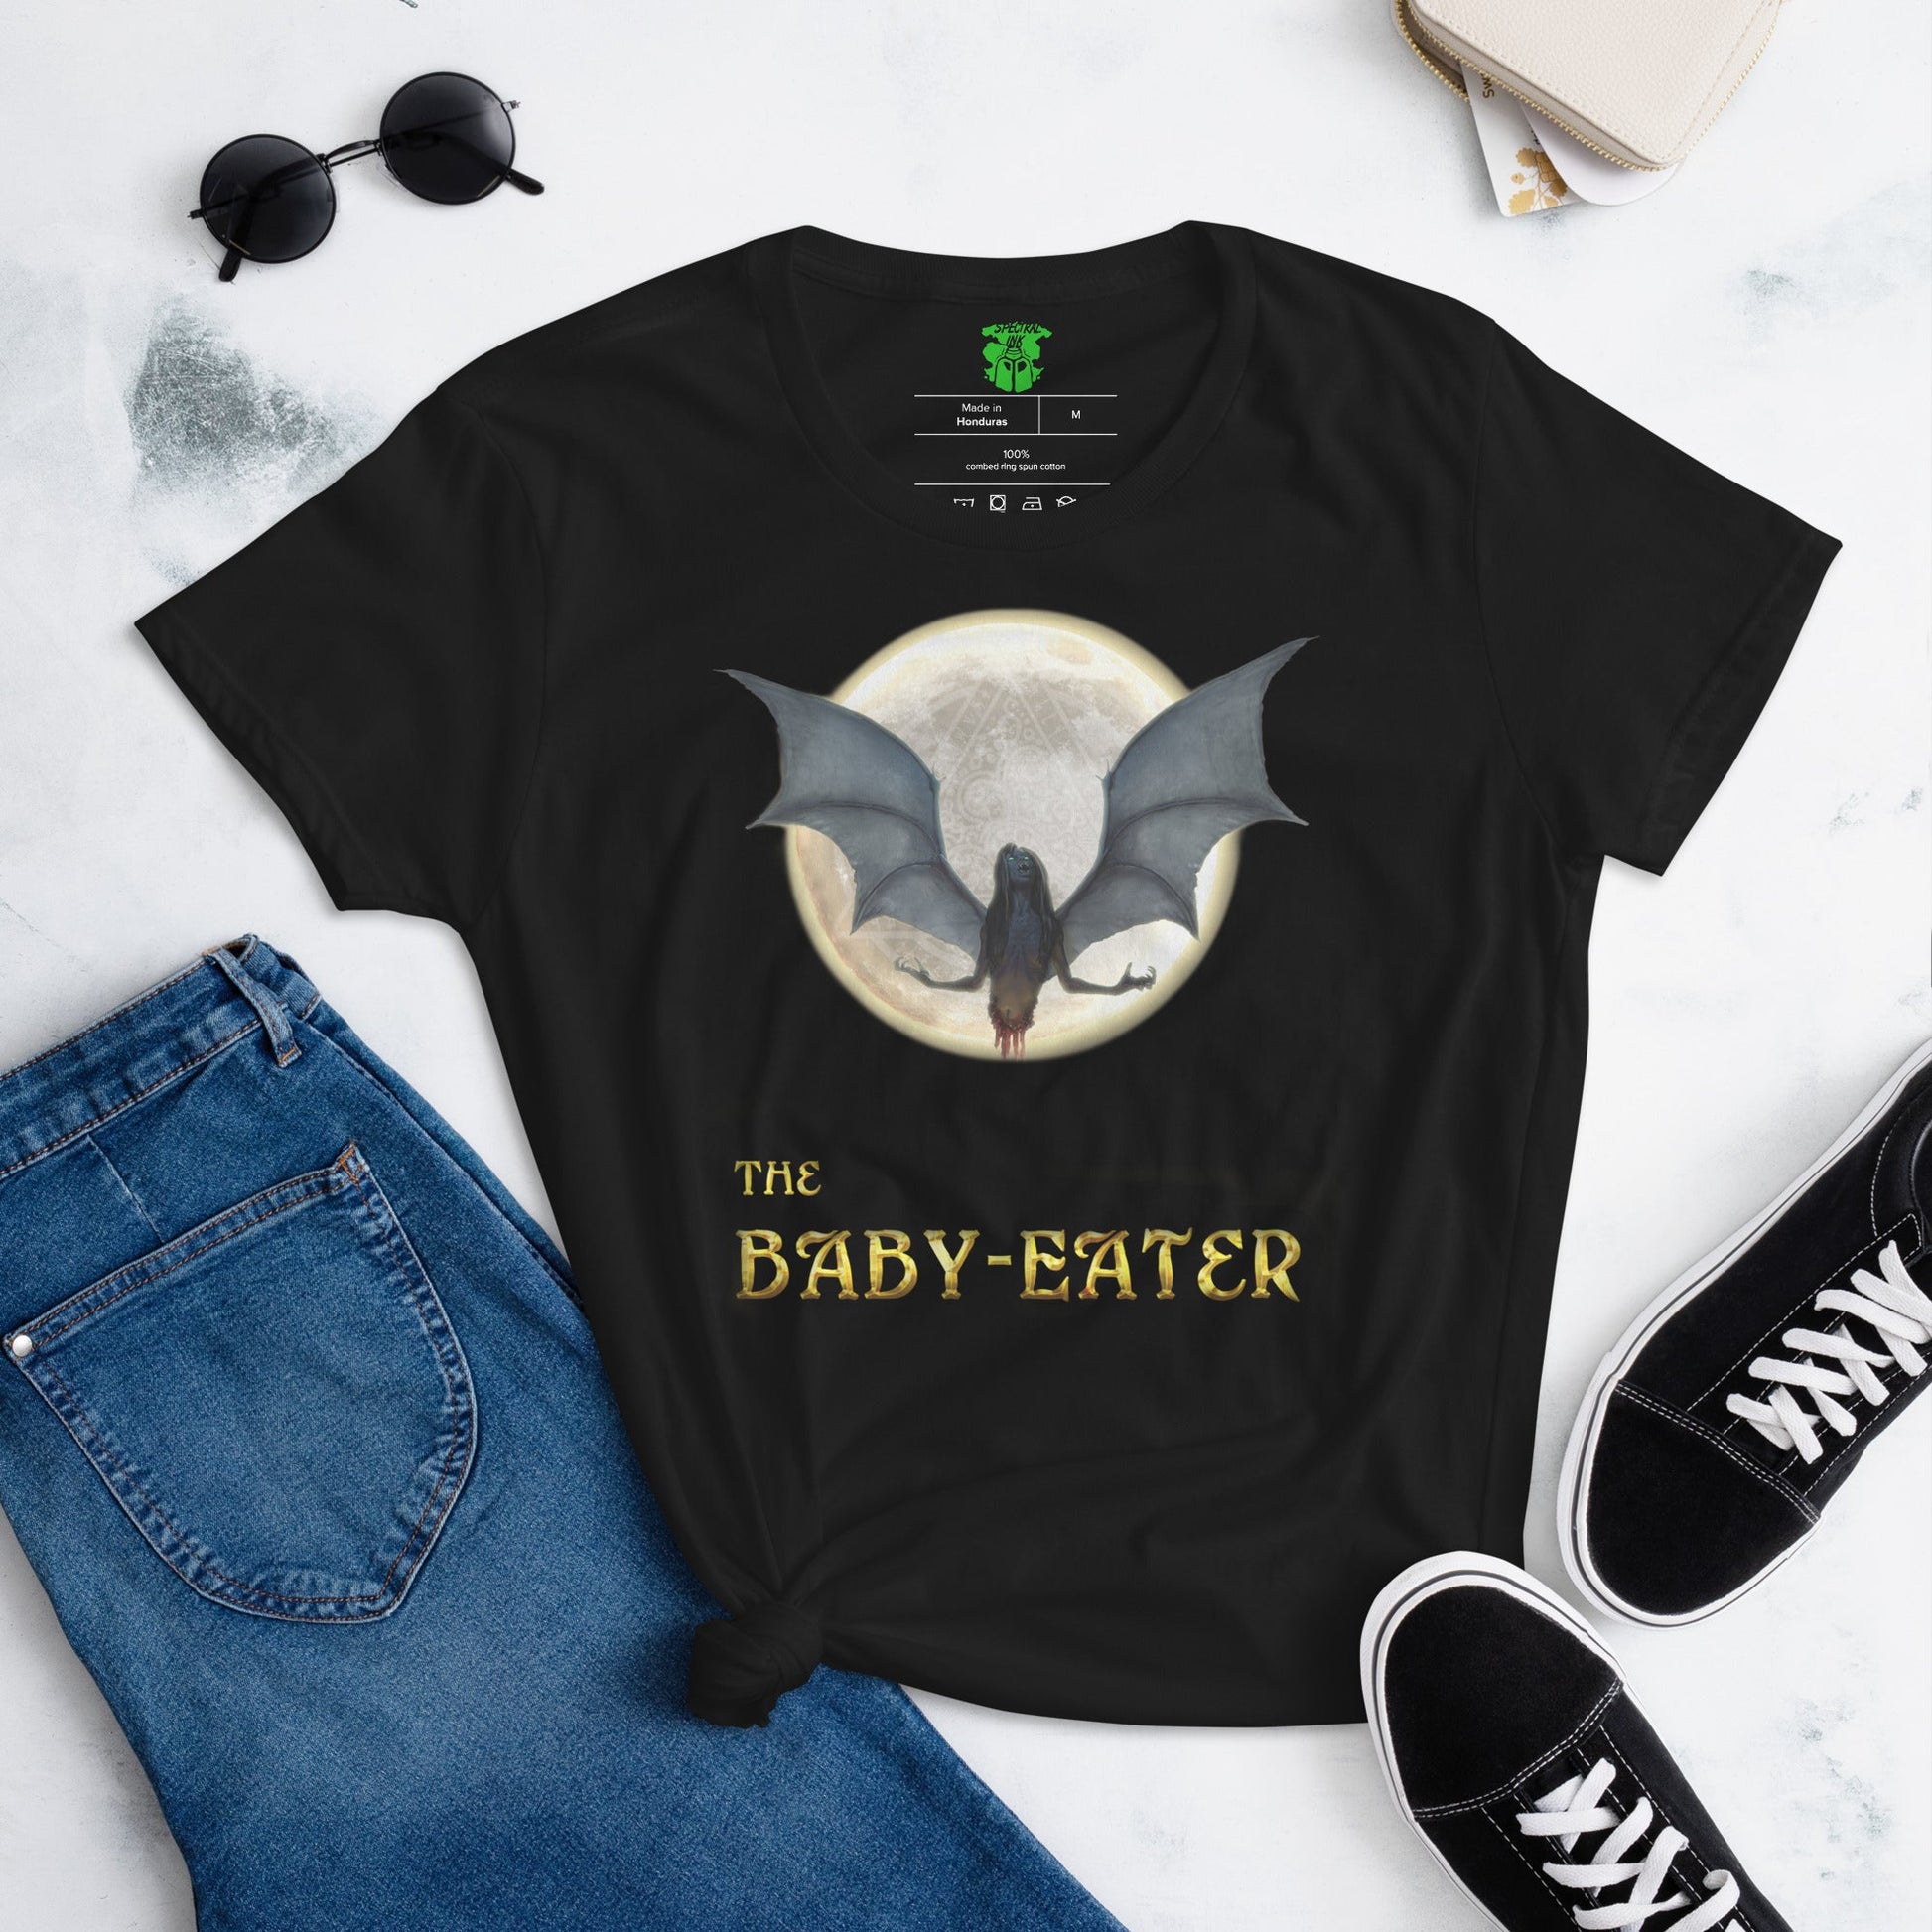 Women's Short-Sleeve Graphic T-Shirt | The Baby-Eater | Awards and Reviews - Spectral Ink Shop - Shirts & Tops -8953668_4937